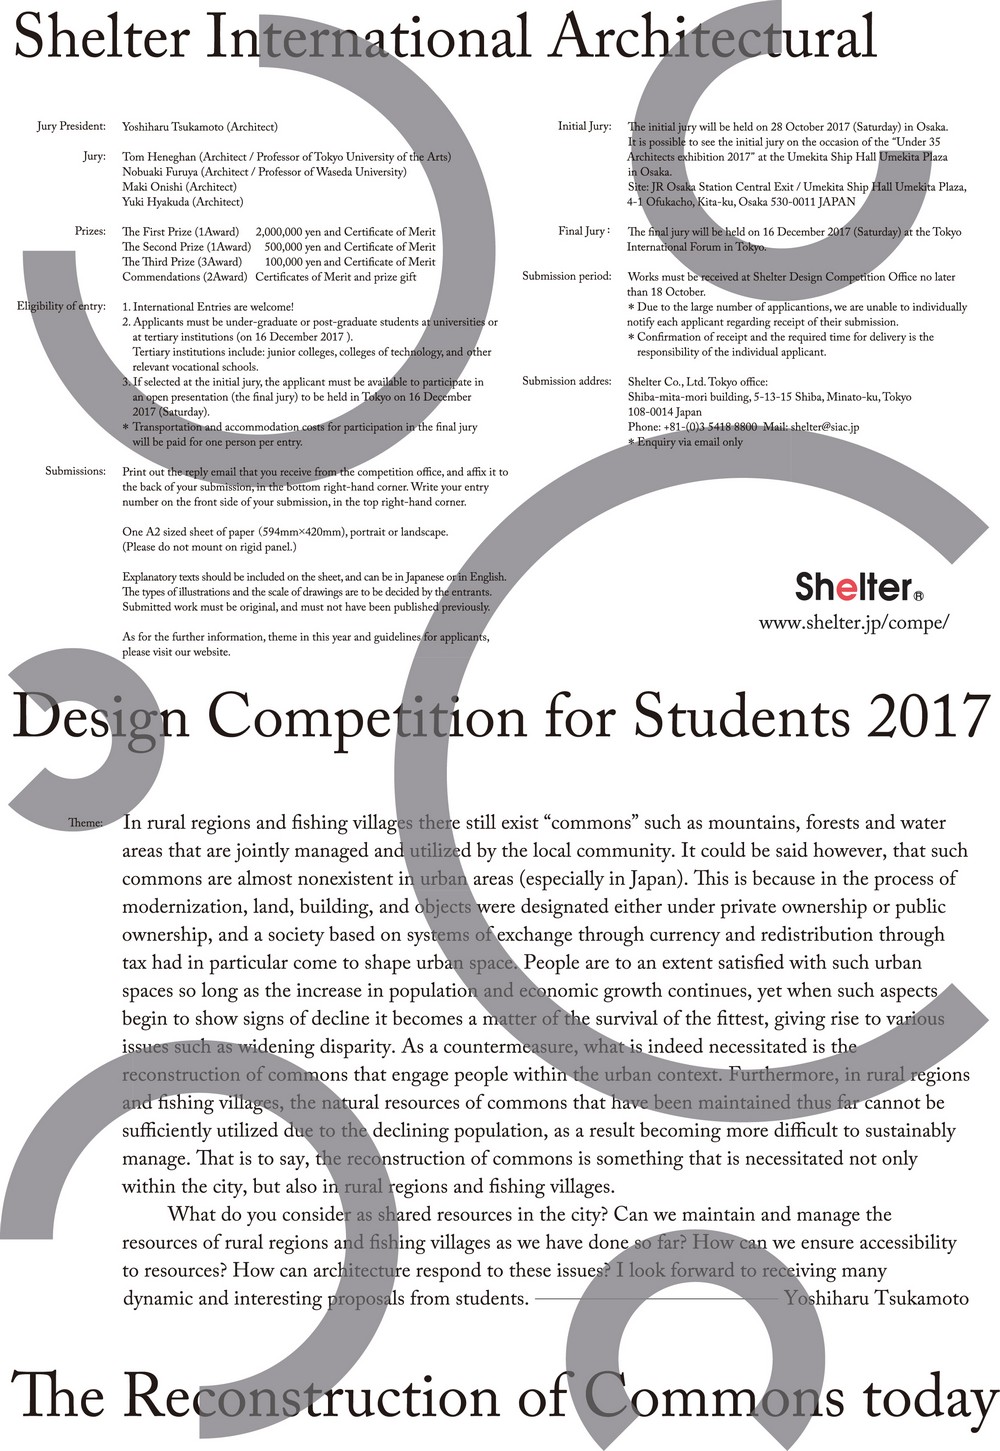 Shelter International Architectural Design Competition for Students